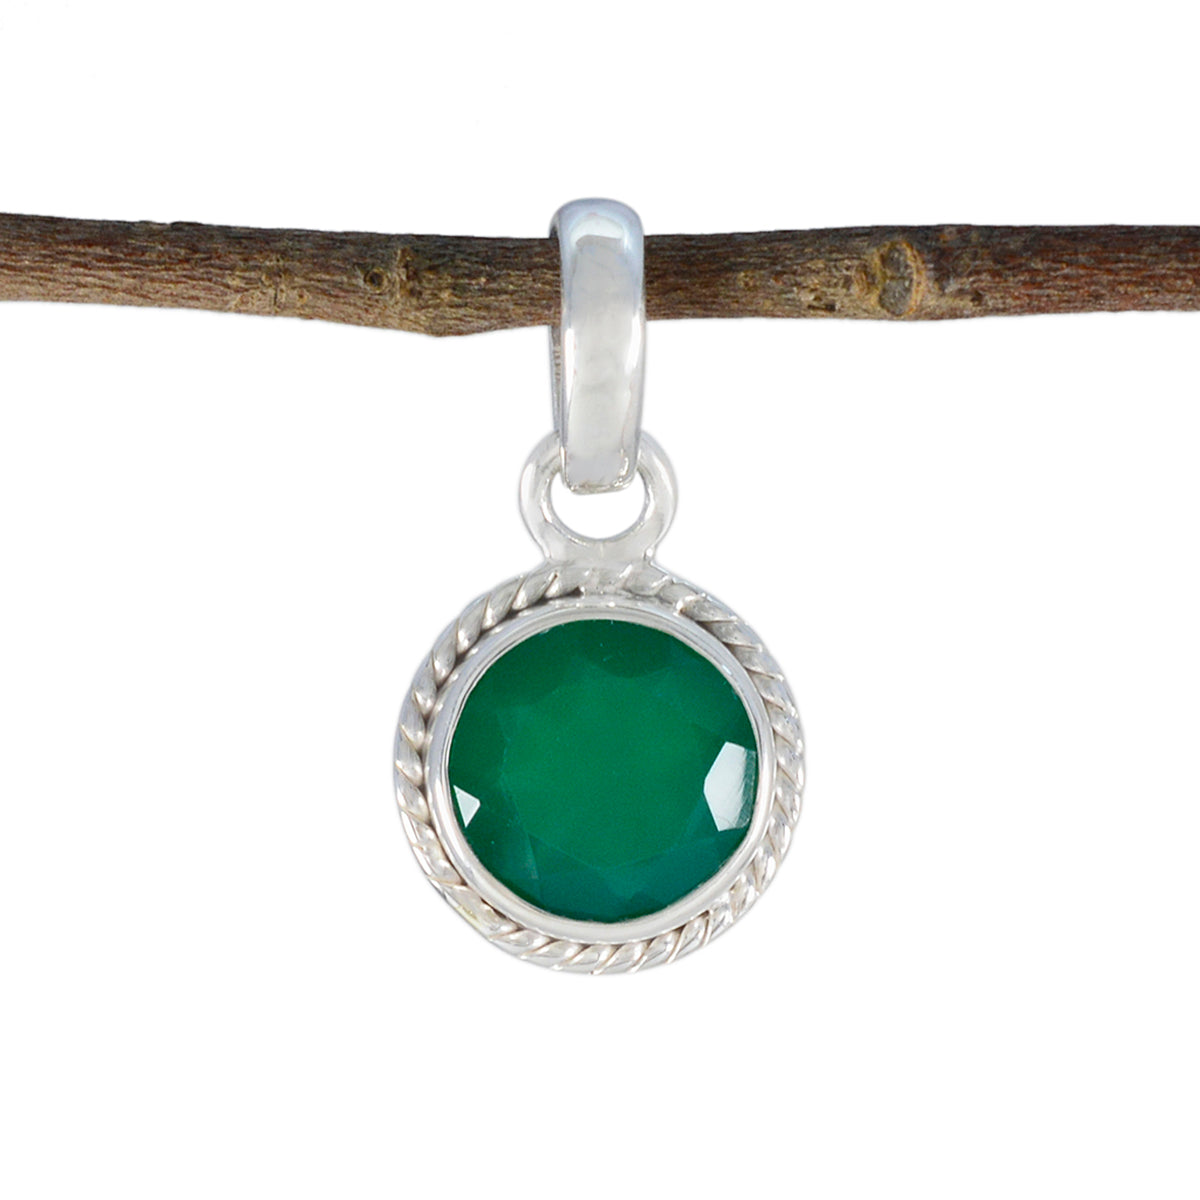 Riyo Charming Gemstone Round Faceted Green Green Onyx 1198 Sterling Silver Pendant Gift For Good Friday